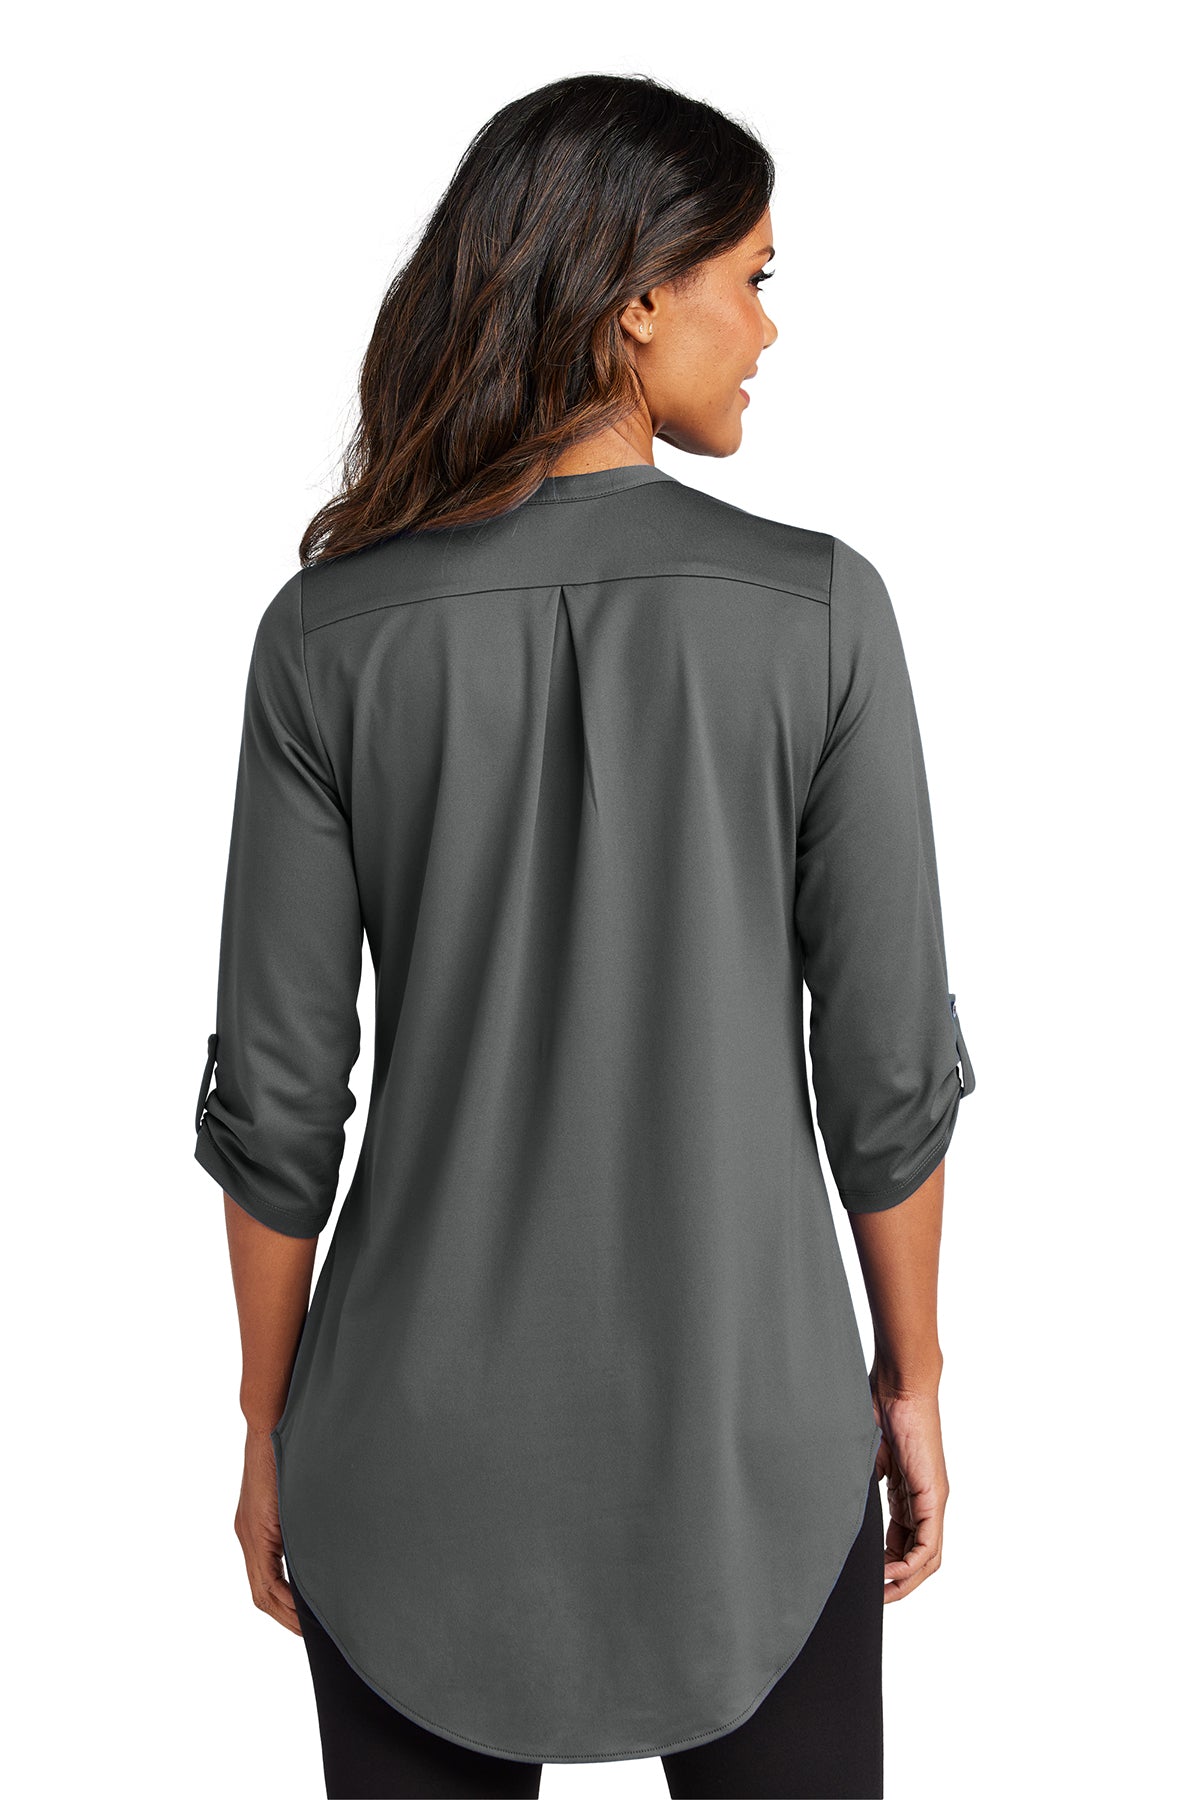 Thea City Stretch 3/4 Sleeve Tunic - Graphite (Ships in 1-2 Weeks)